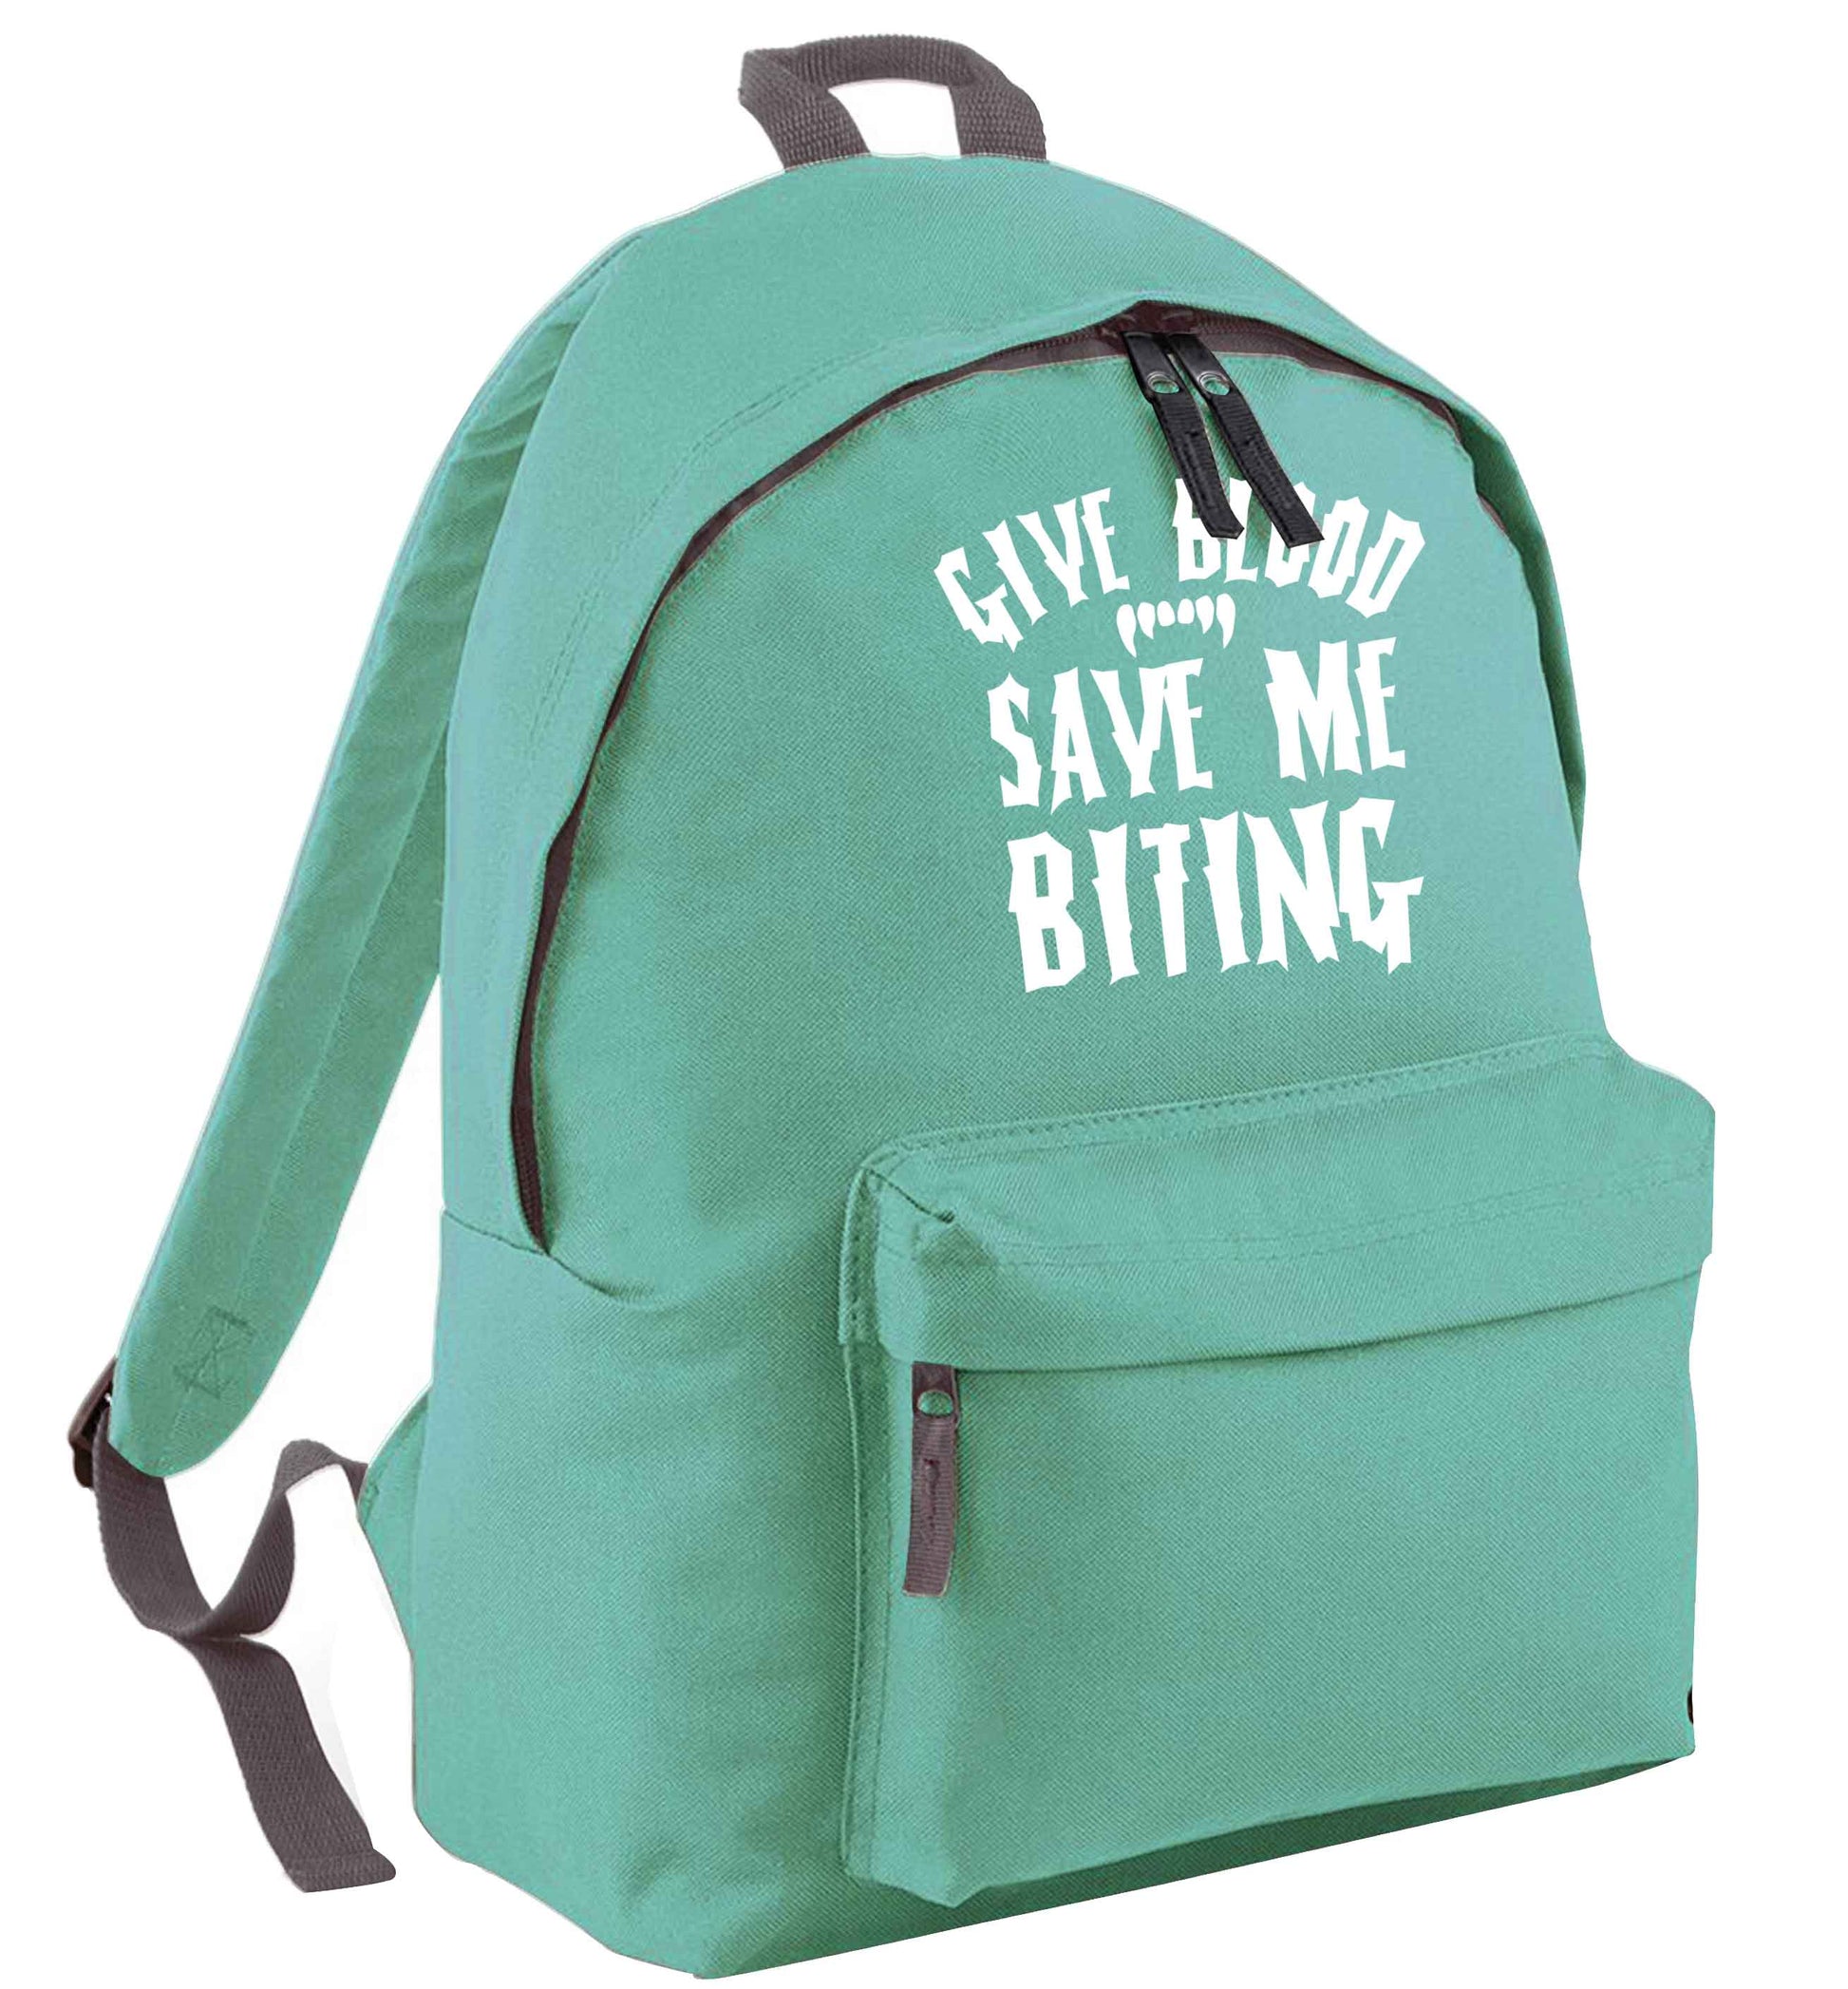 Give blood save me biting mint adults backpack